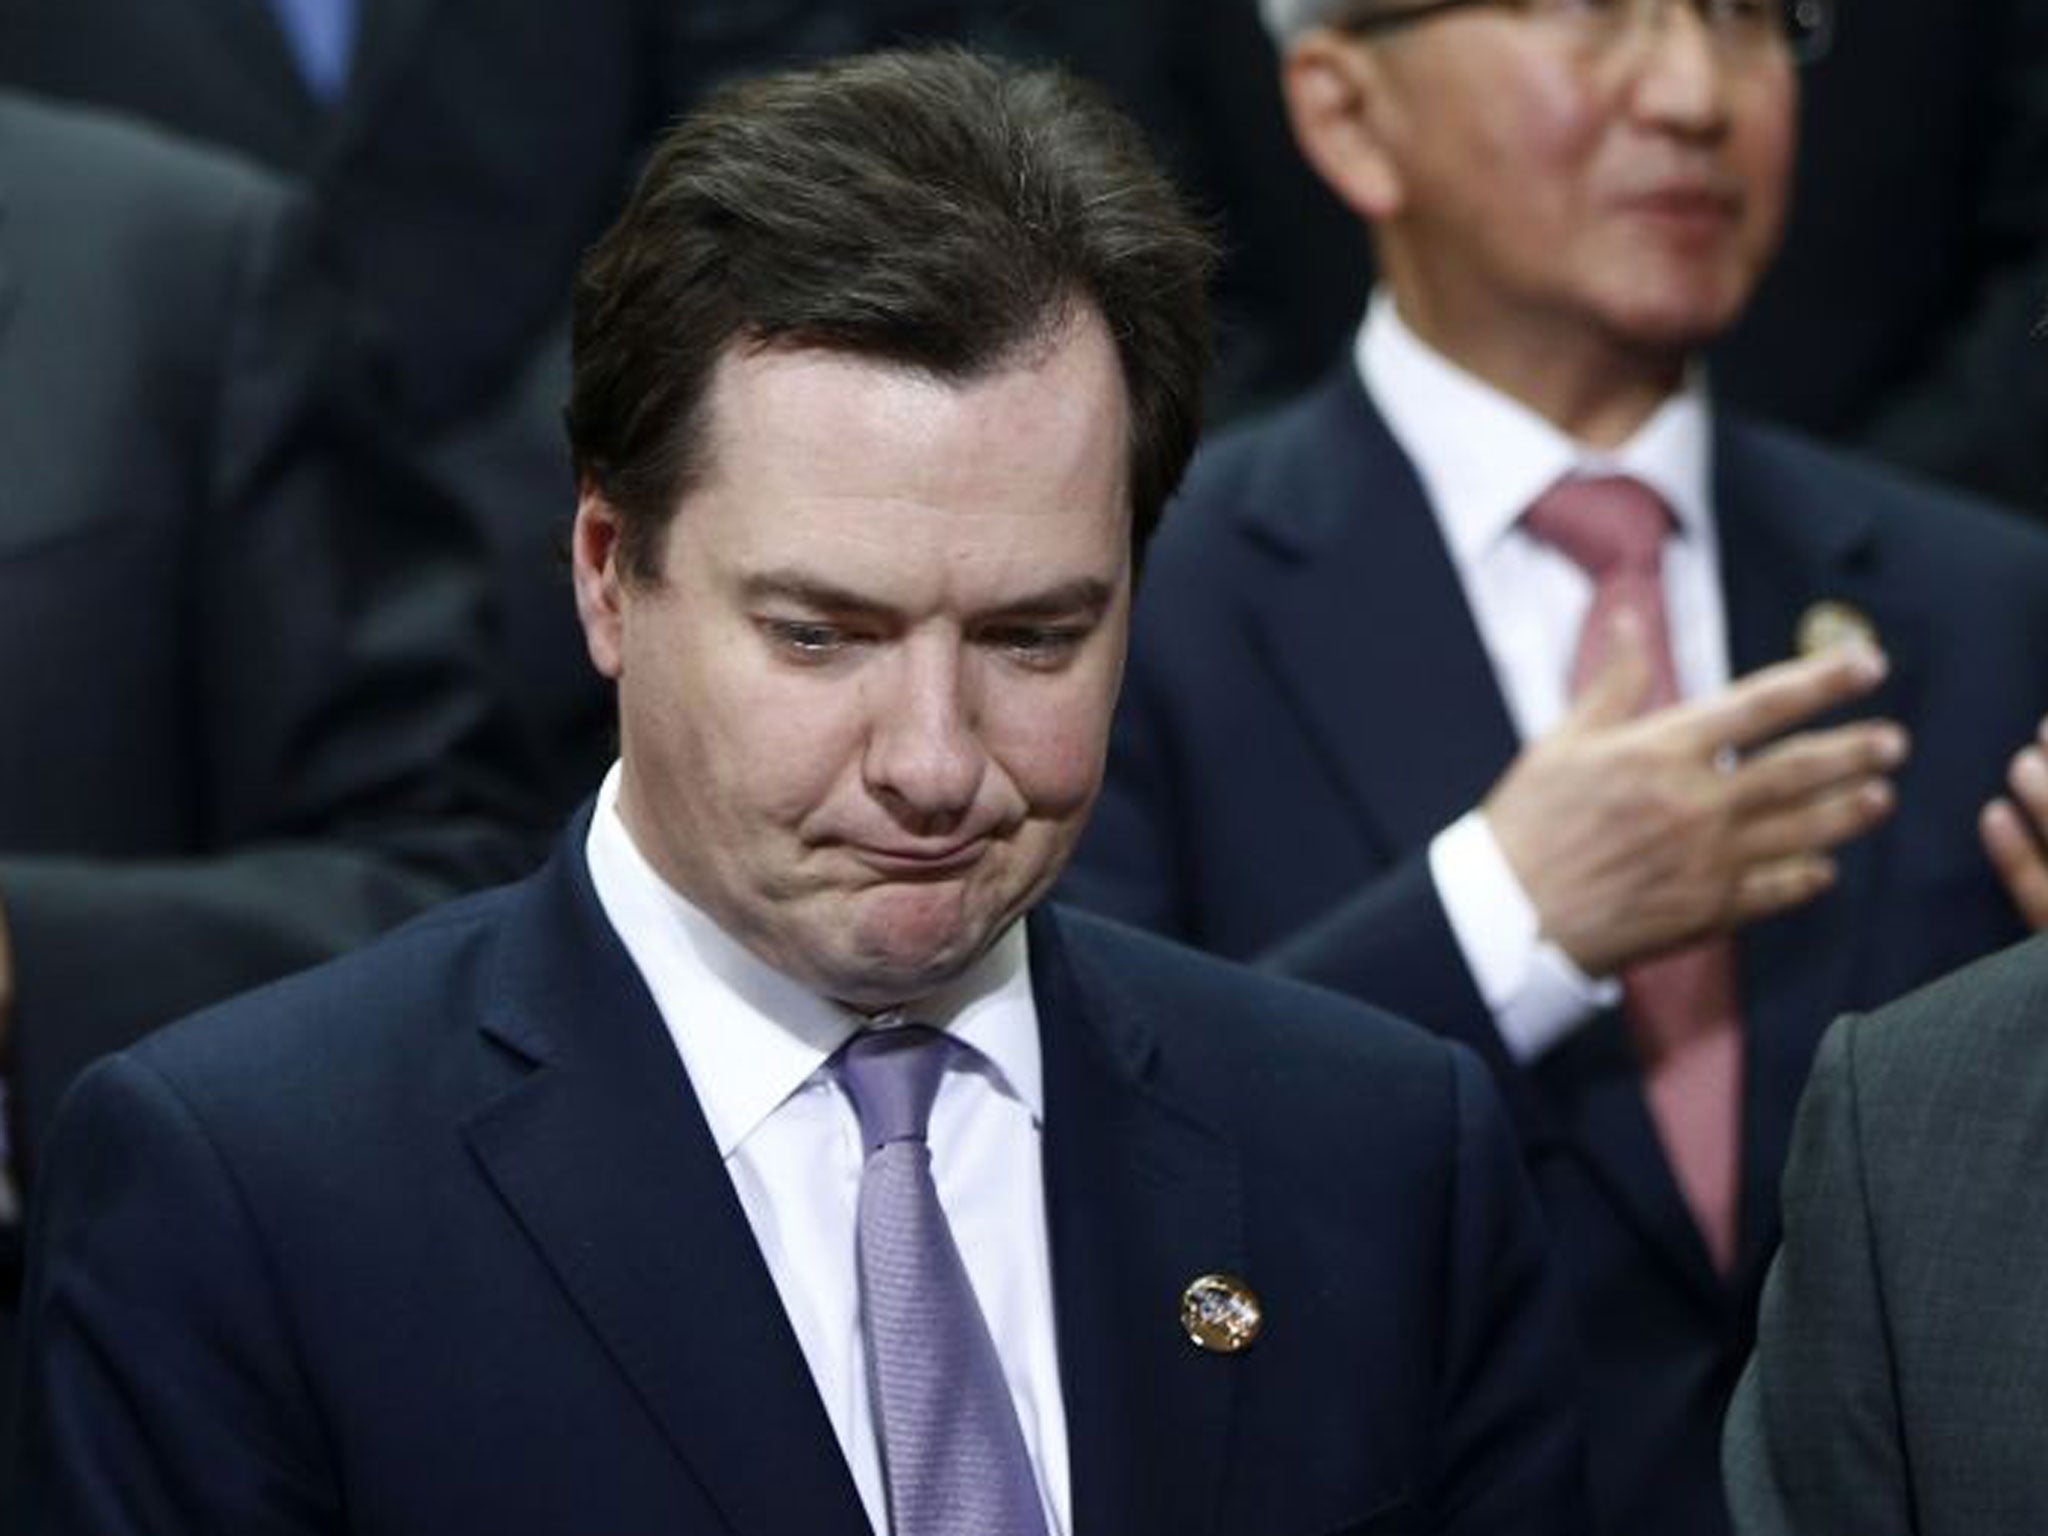 George Osborne's credibility may take another hit, after Fitch credit rating agency downgraded the UK's rating